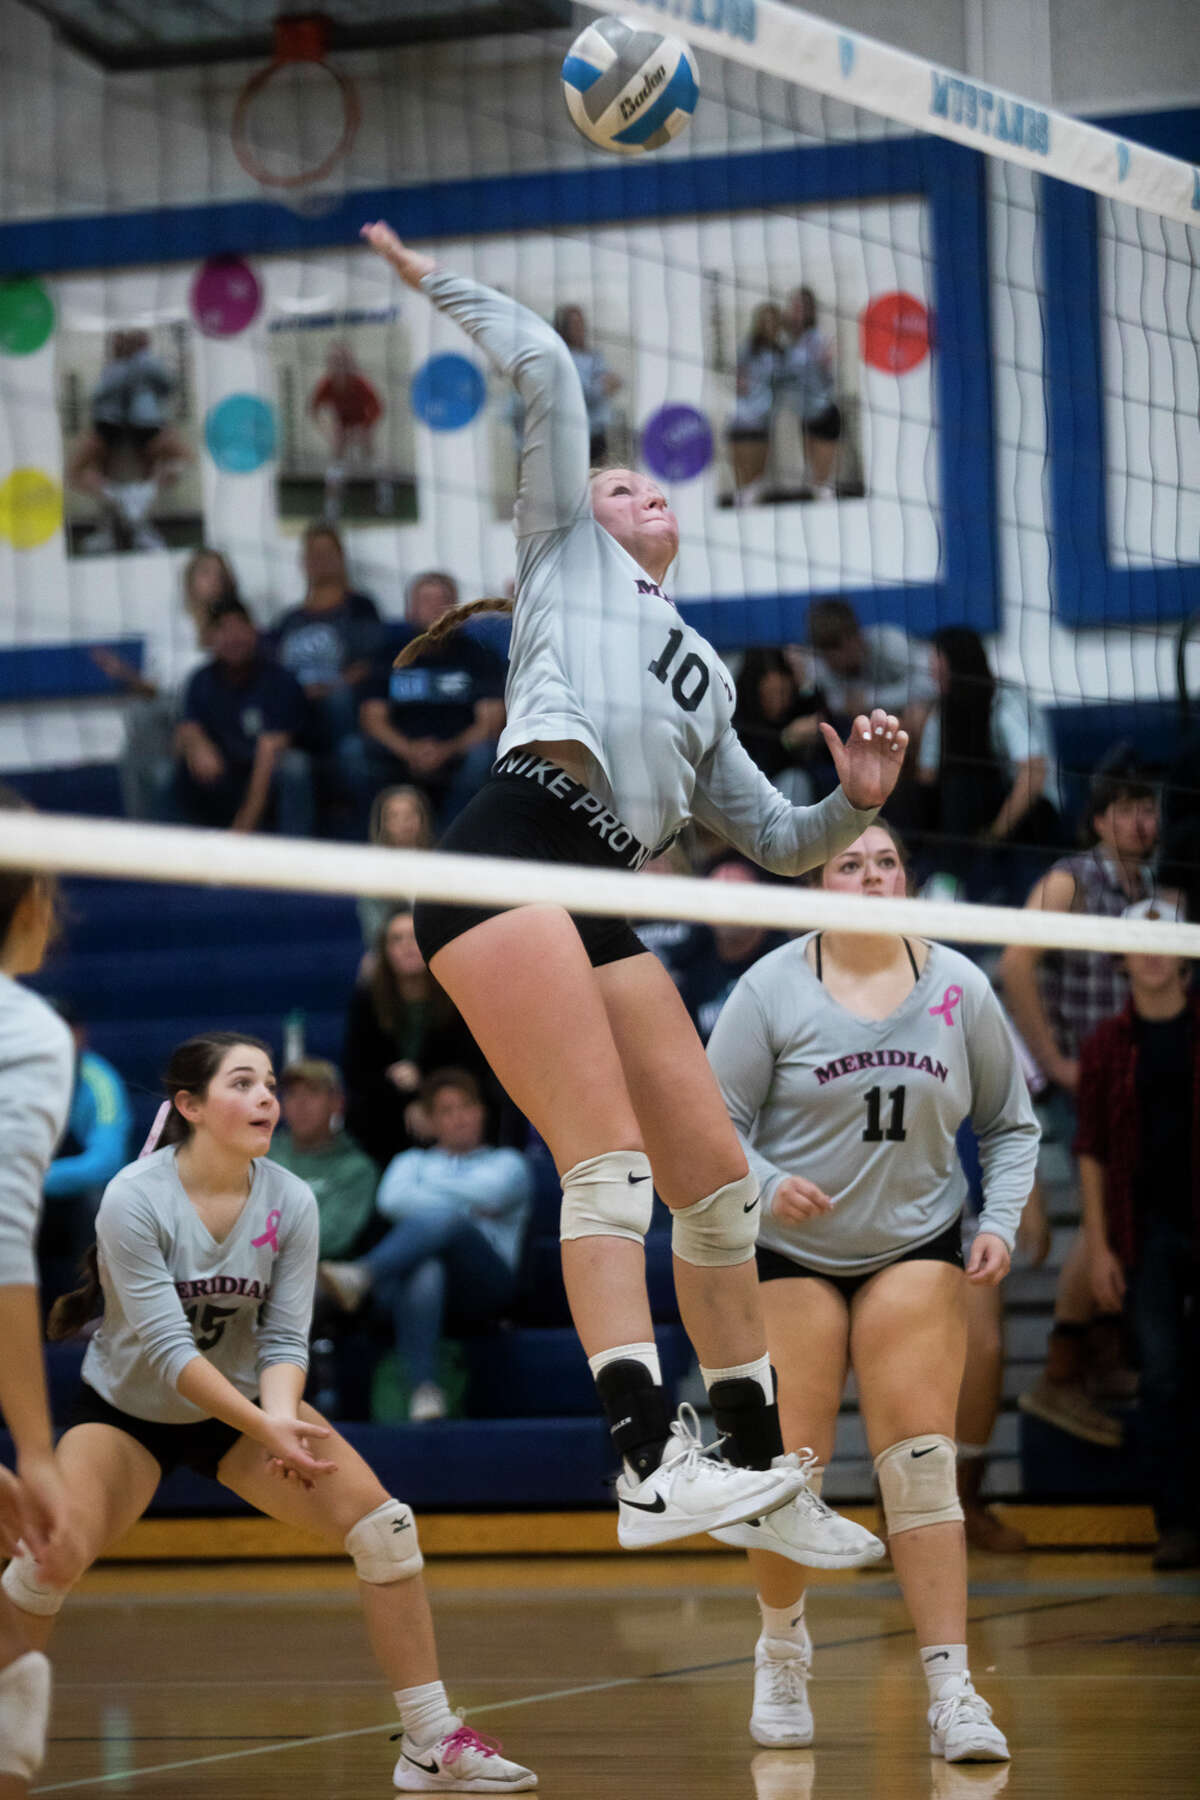 Meridian's Izabelle Dunn spikes the ball during a game against Pinconning Monday, Oct. 18, 2021 at Meridian Early College High School. (Katy Kildee/kkildee@mdn.net)